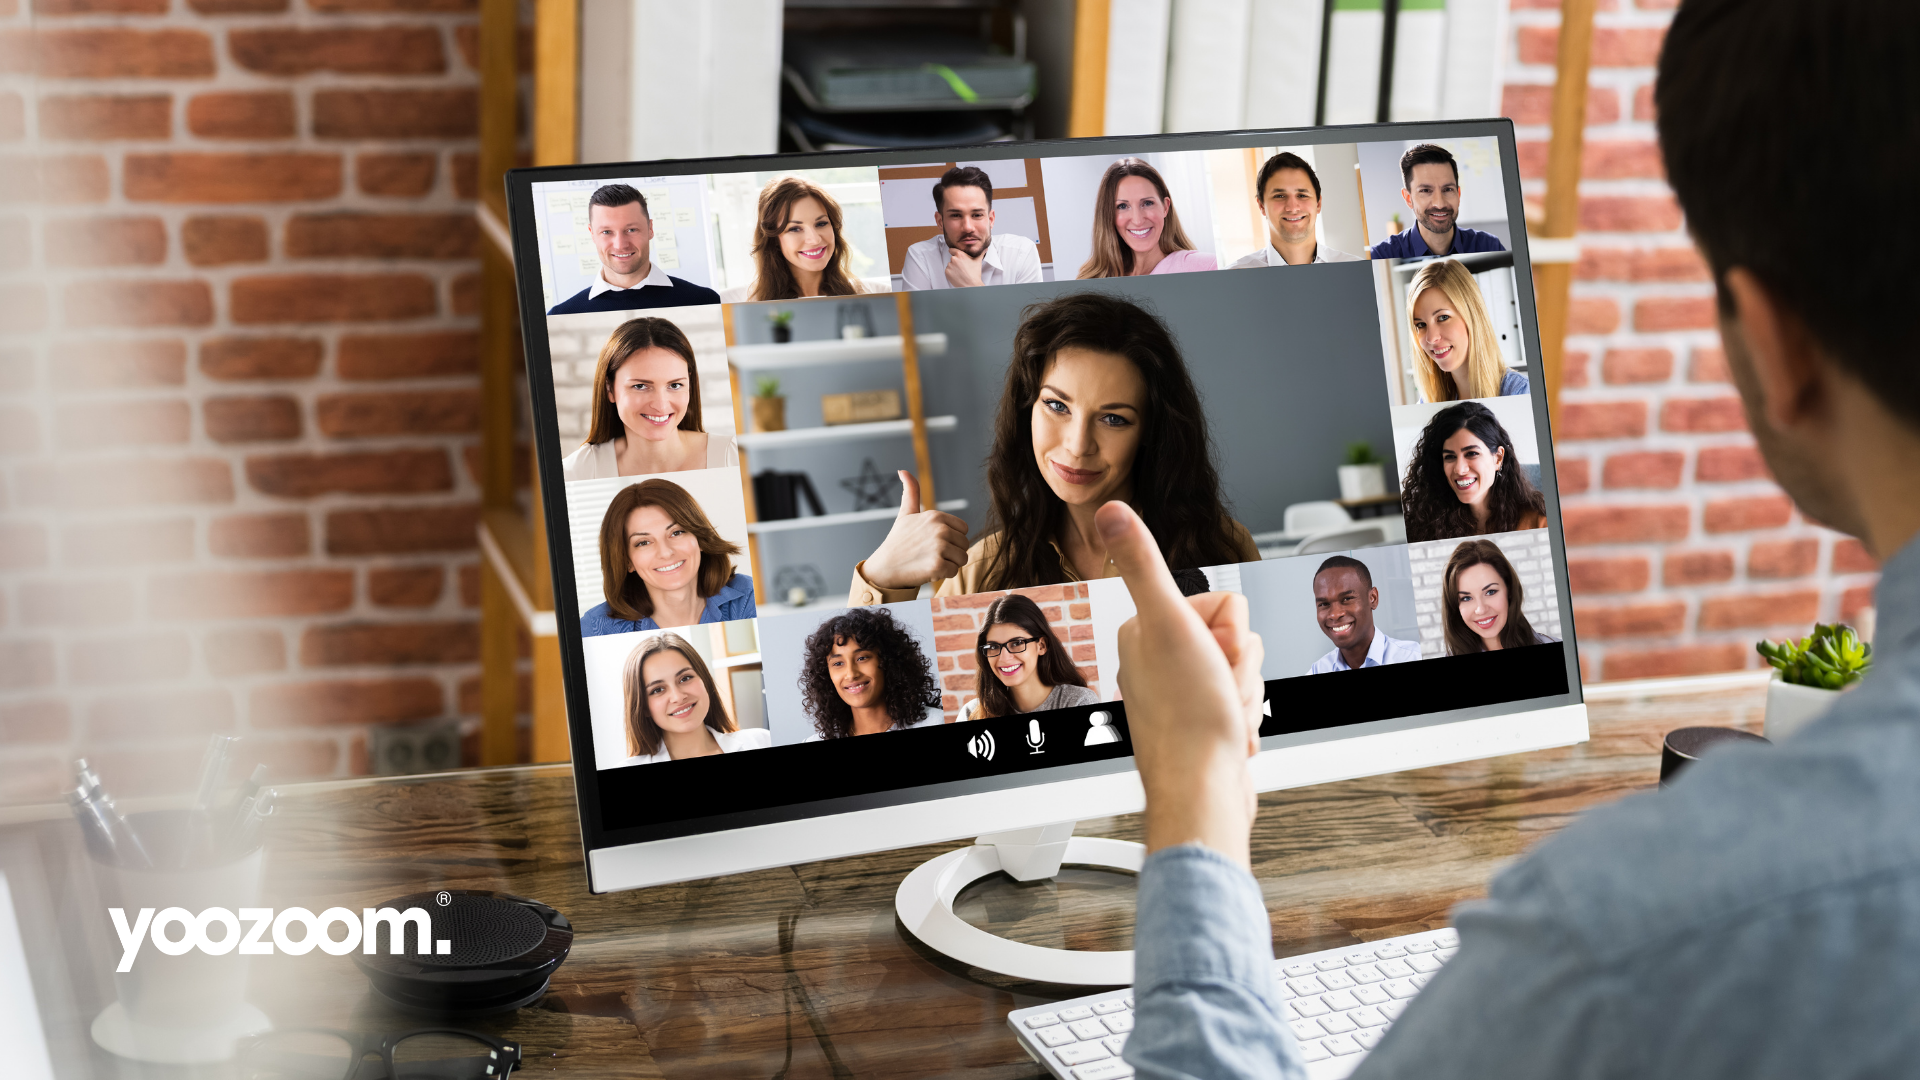 We all know Zoom and Microsoft Teams, but what about the underdogs? Discover another great video conferencing solution that might just run on MAGIC.